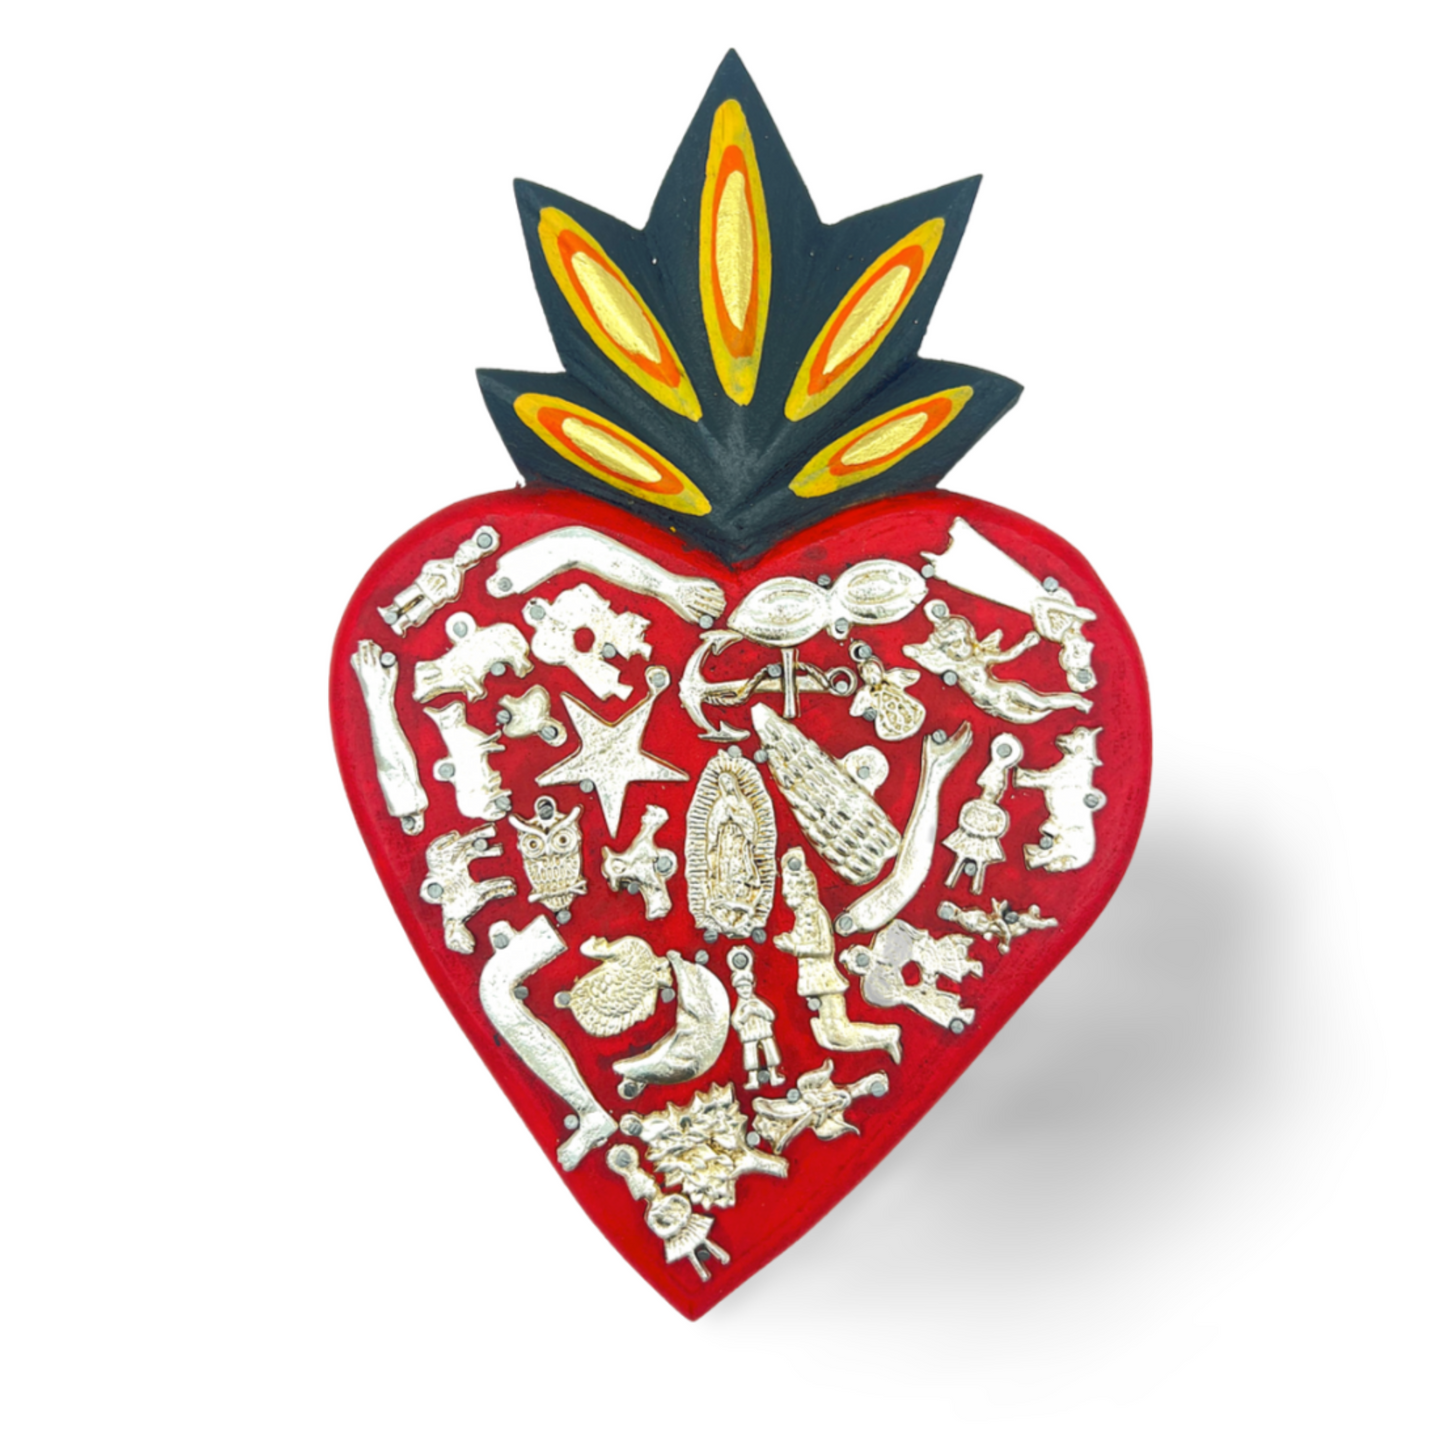 main image Ex Voto Wooden Sacred Heart, hand-painted by Mexican artisans, featuring colorful milagros, perfect for wall decor and enhancing your space.